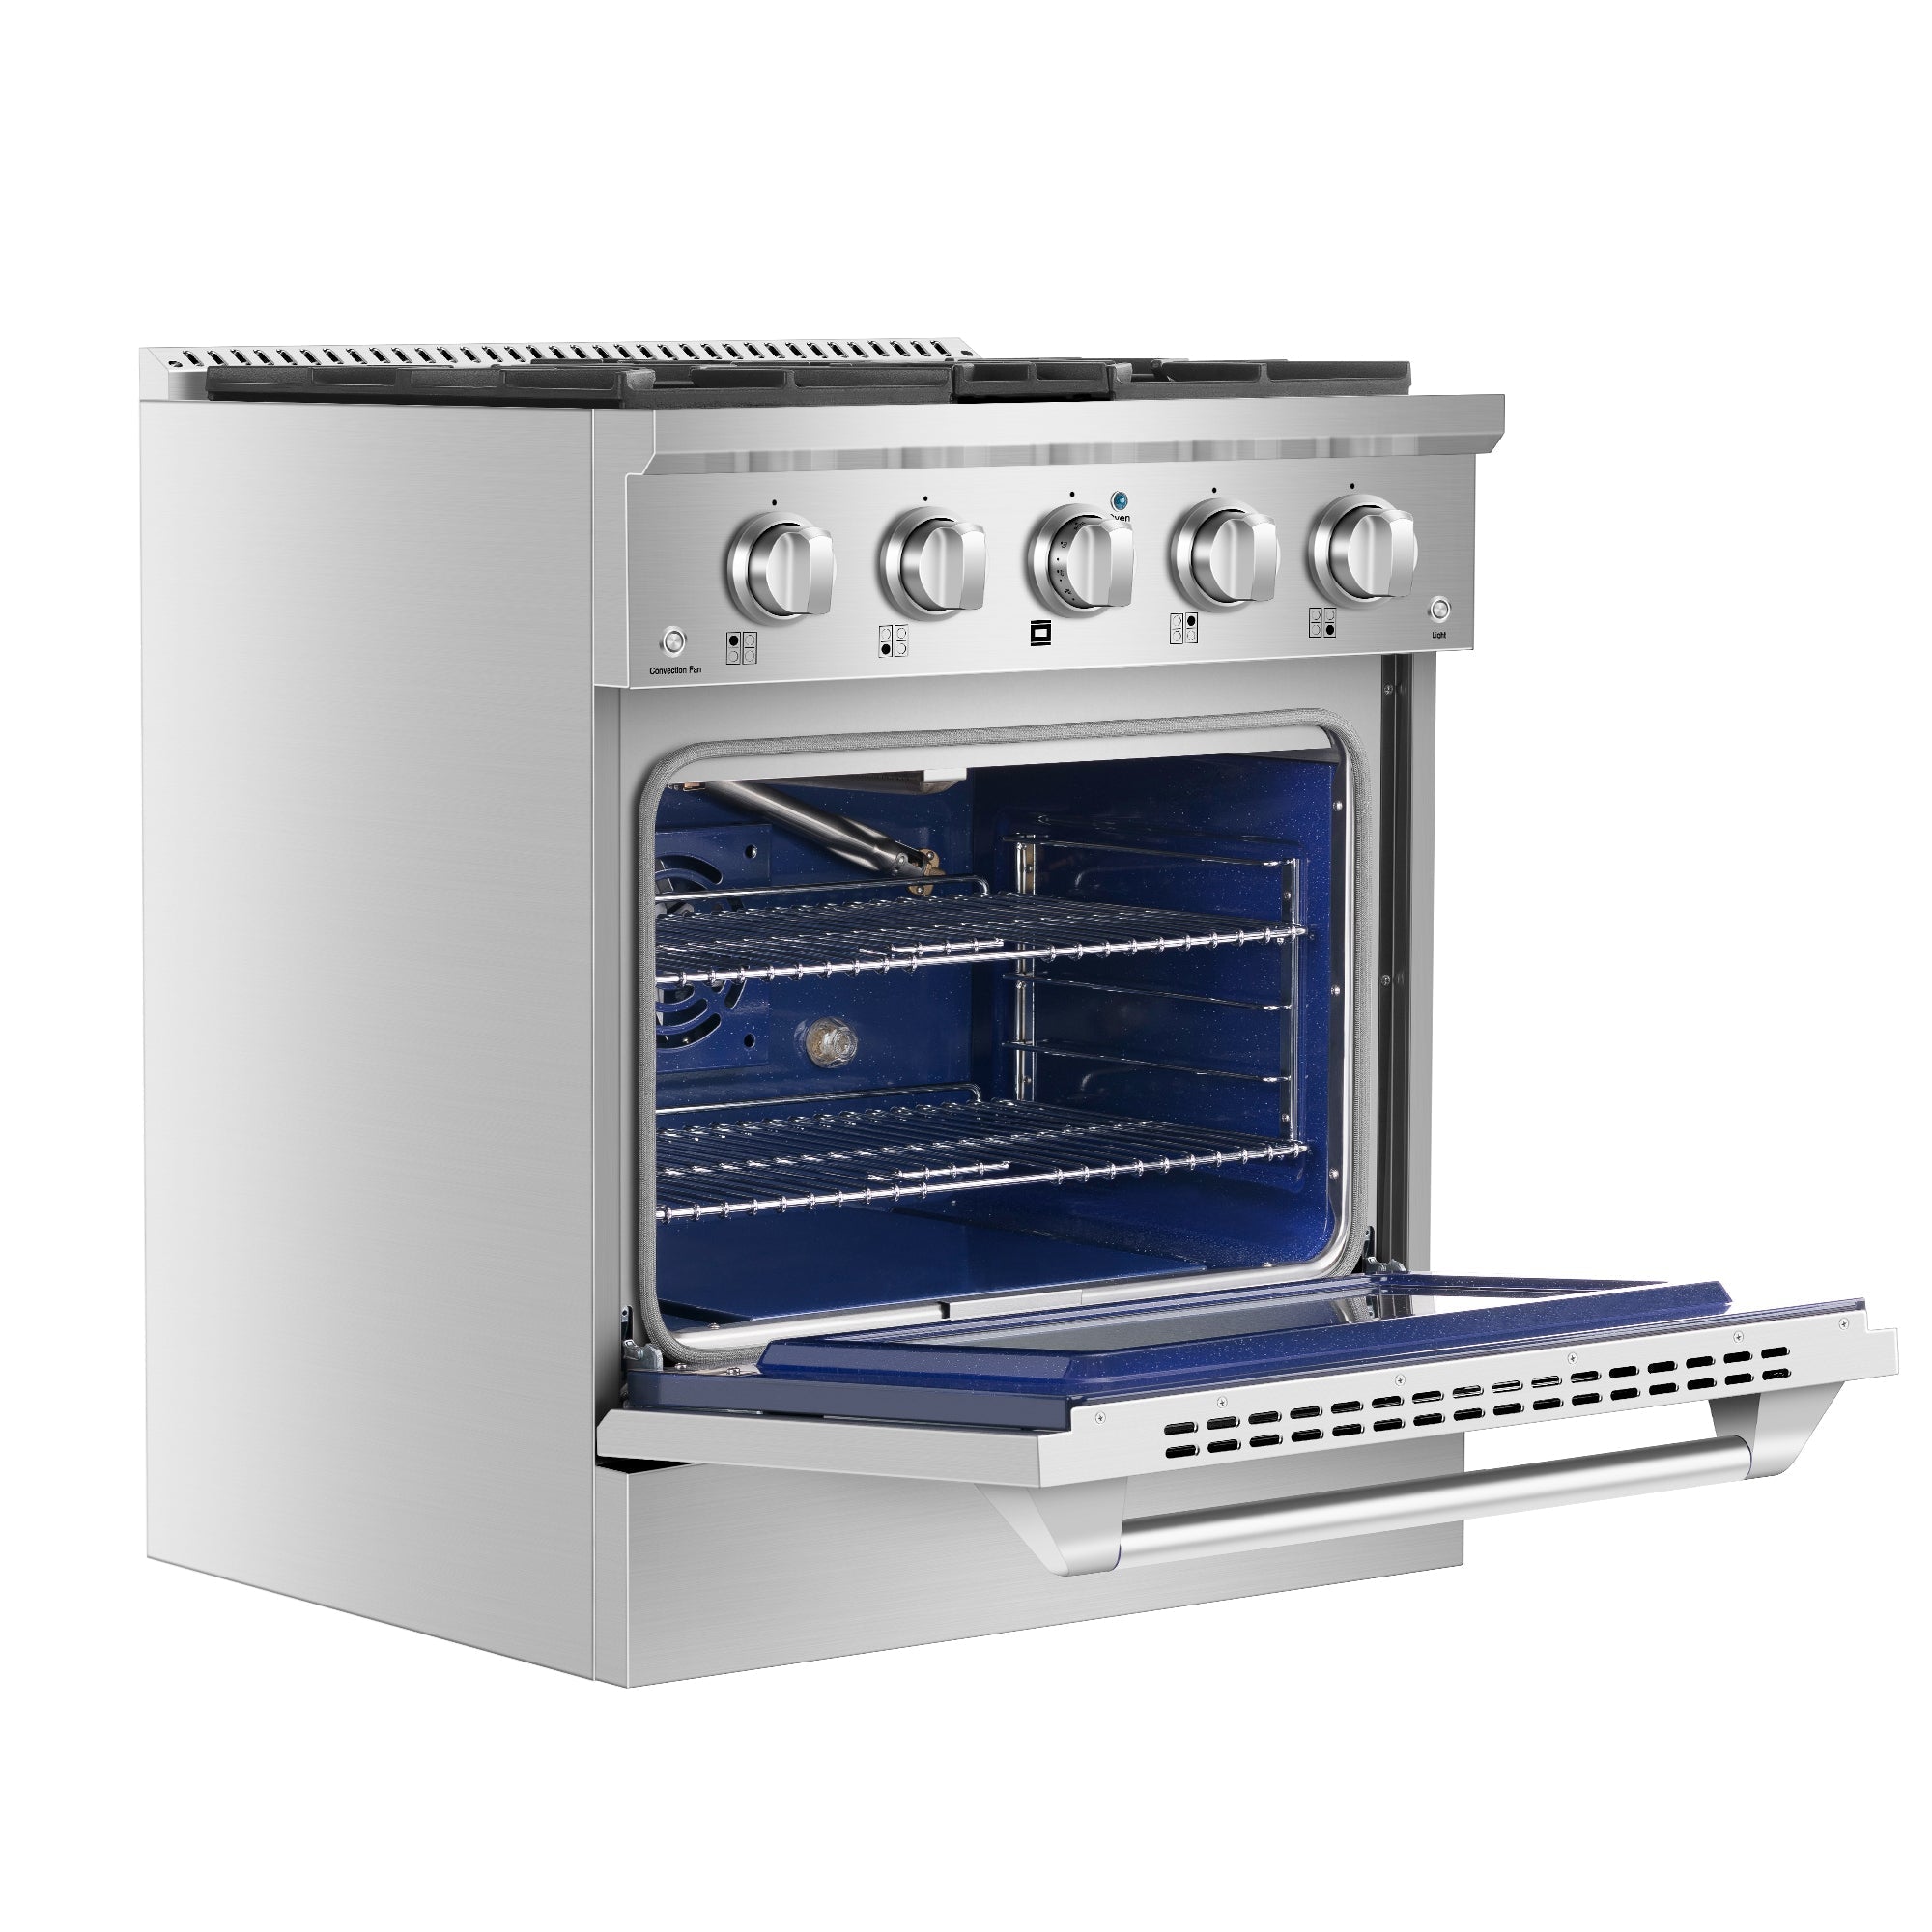 Empava 30 in. Pro-Style Freestanding Gas on Gas Range in Stainless Steel (30GR07)